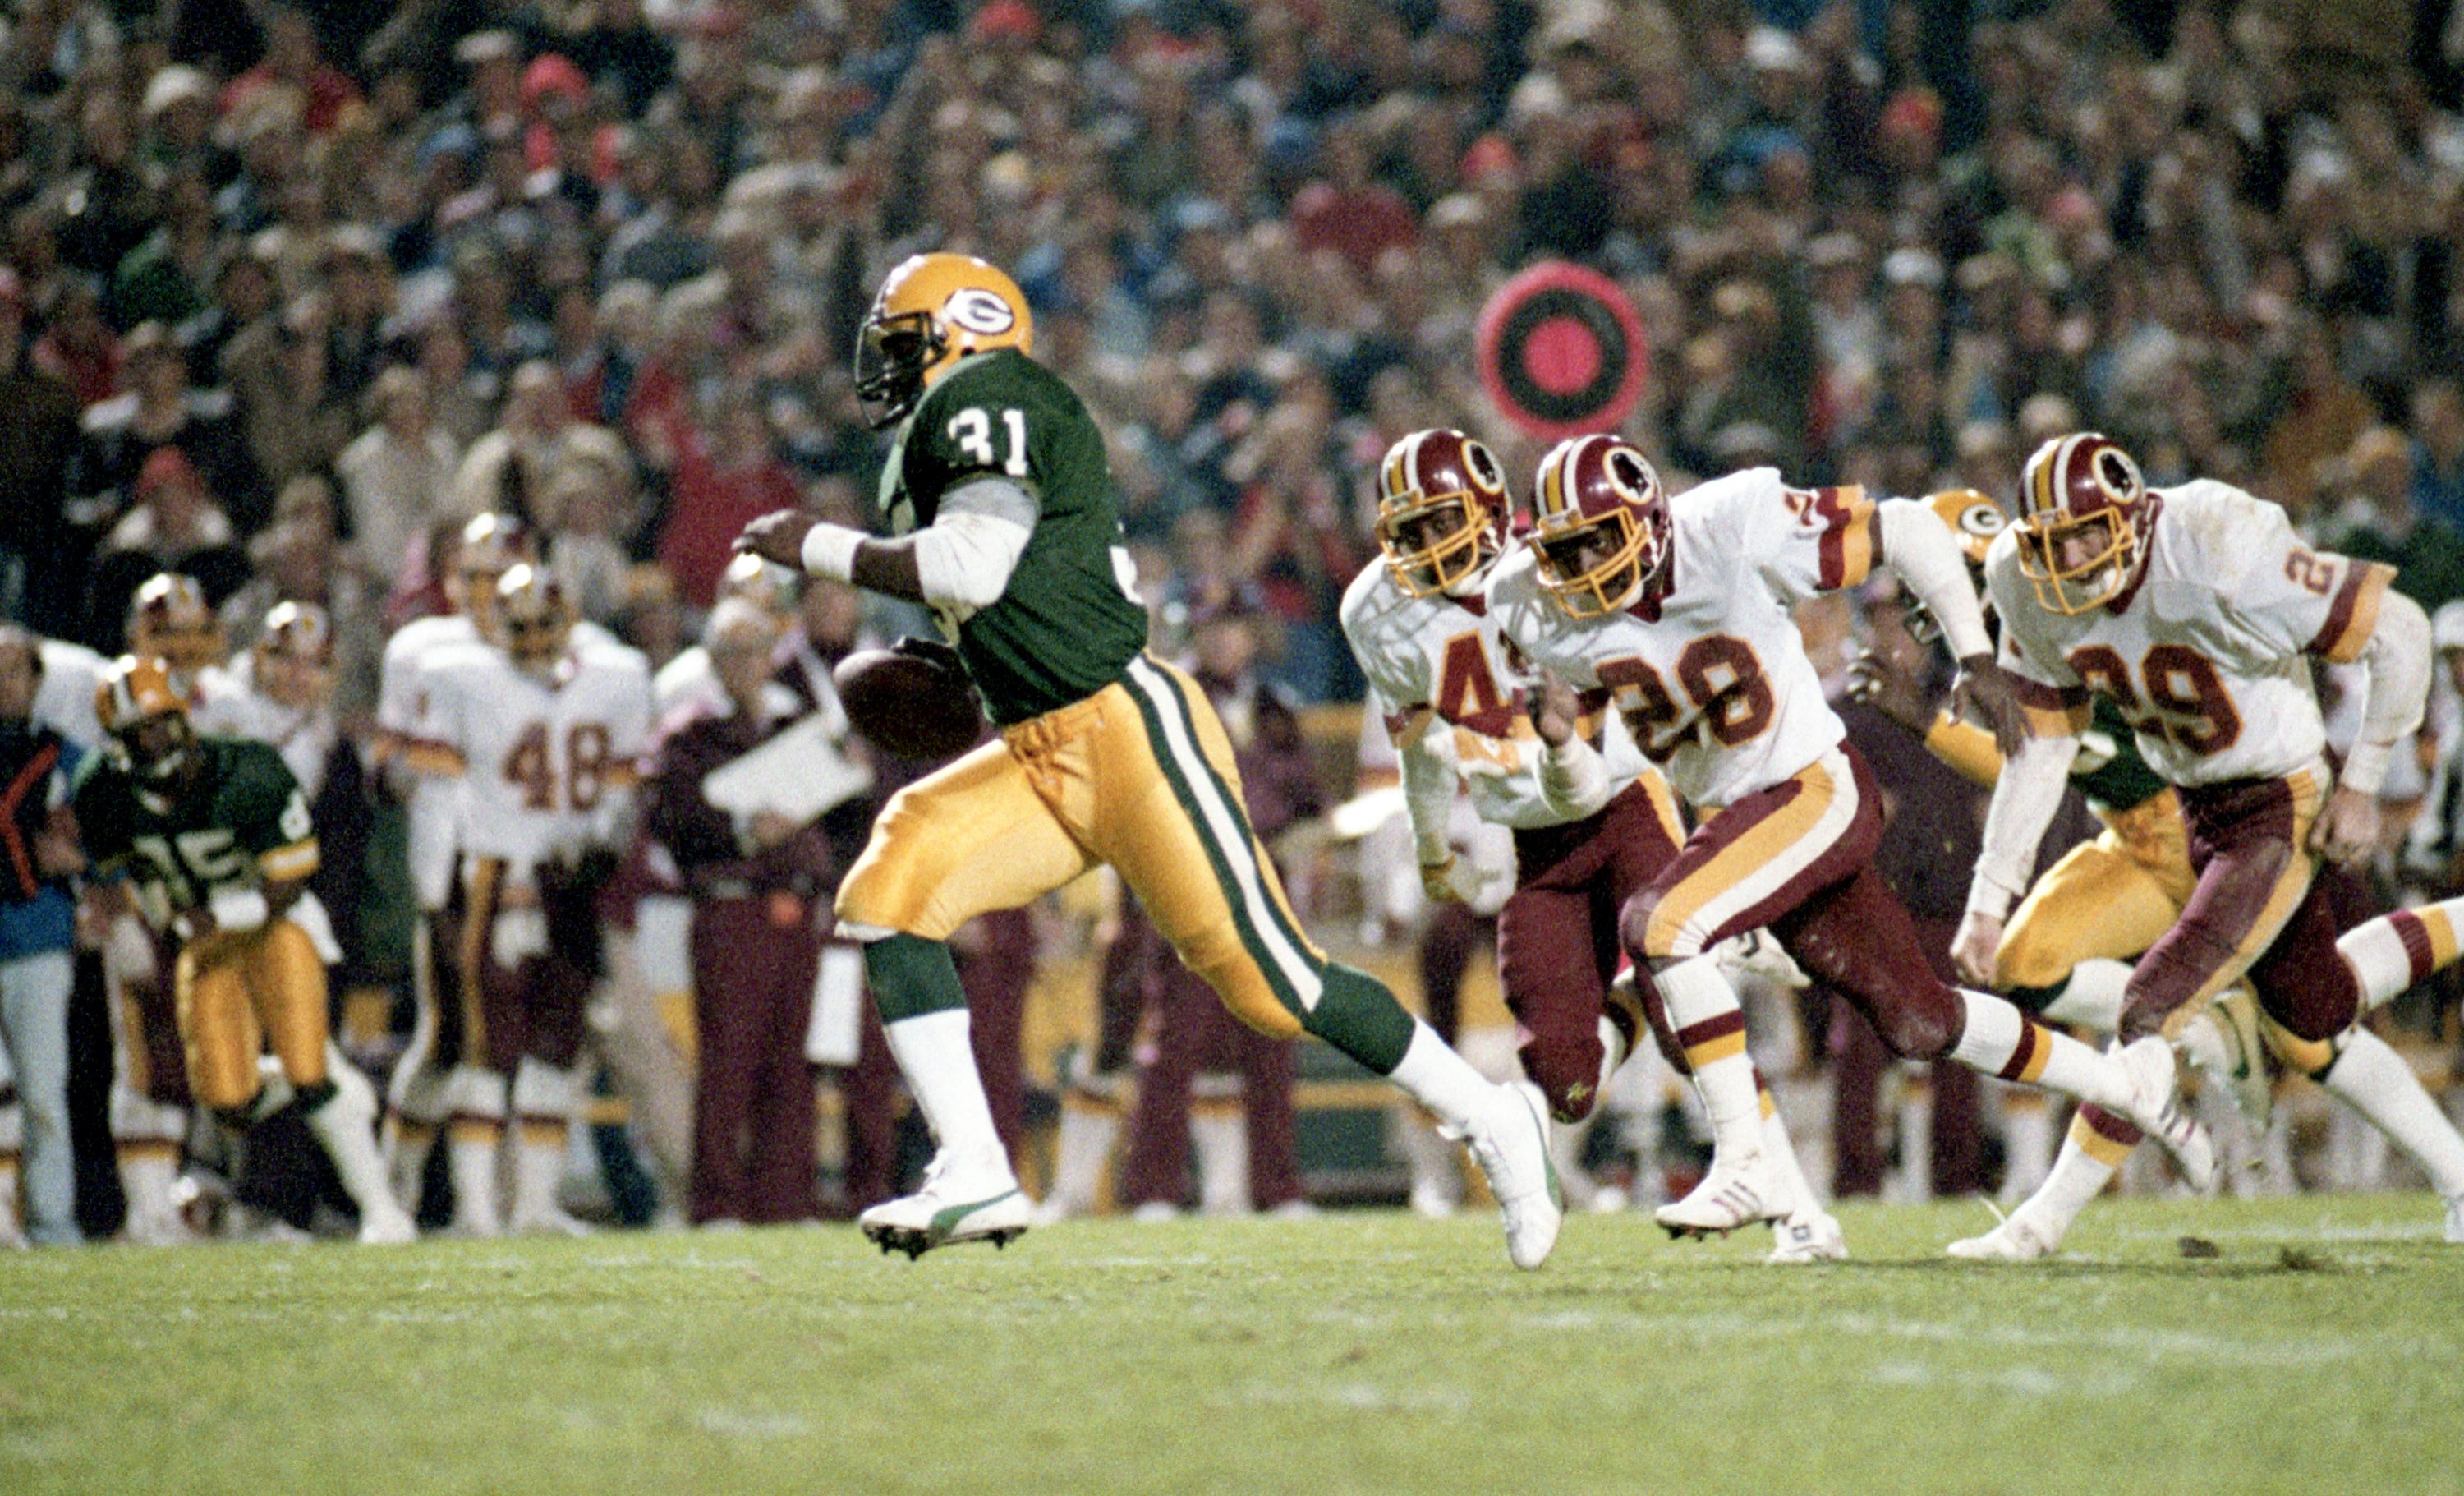 Washington players, including Mark H. Murphy (29), chase Green Bay Packers running back Gerry Ellis (31) on Oct. 17, 1983, at Lambeau Field.